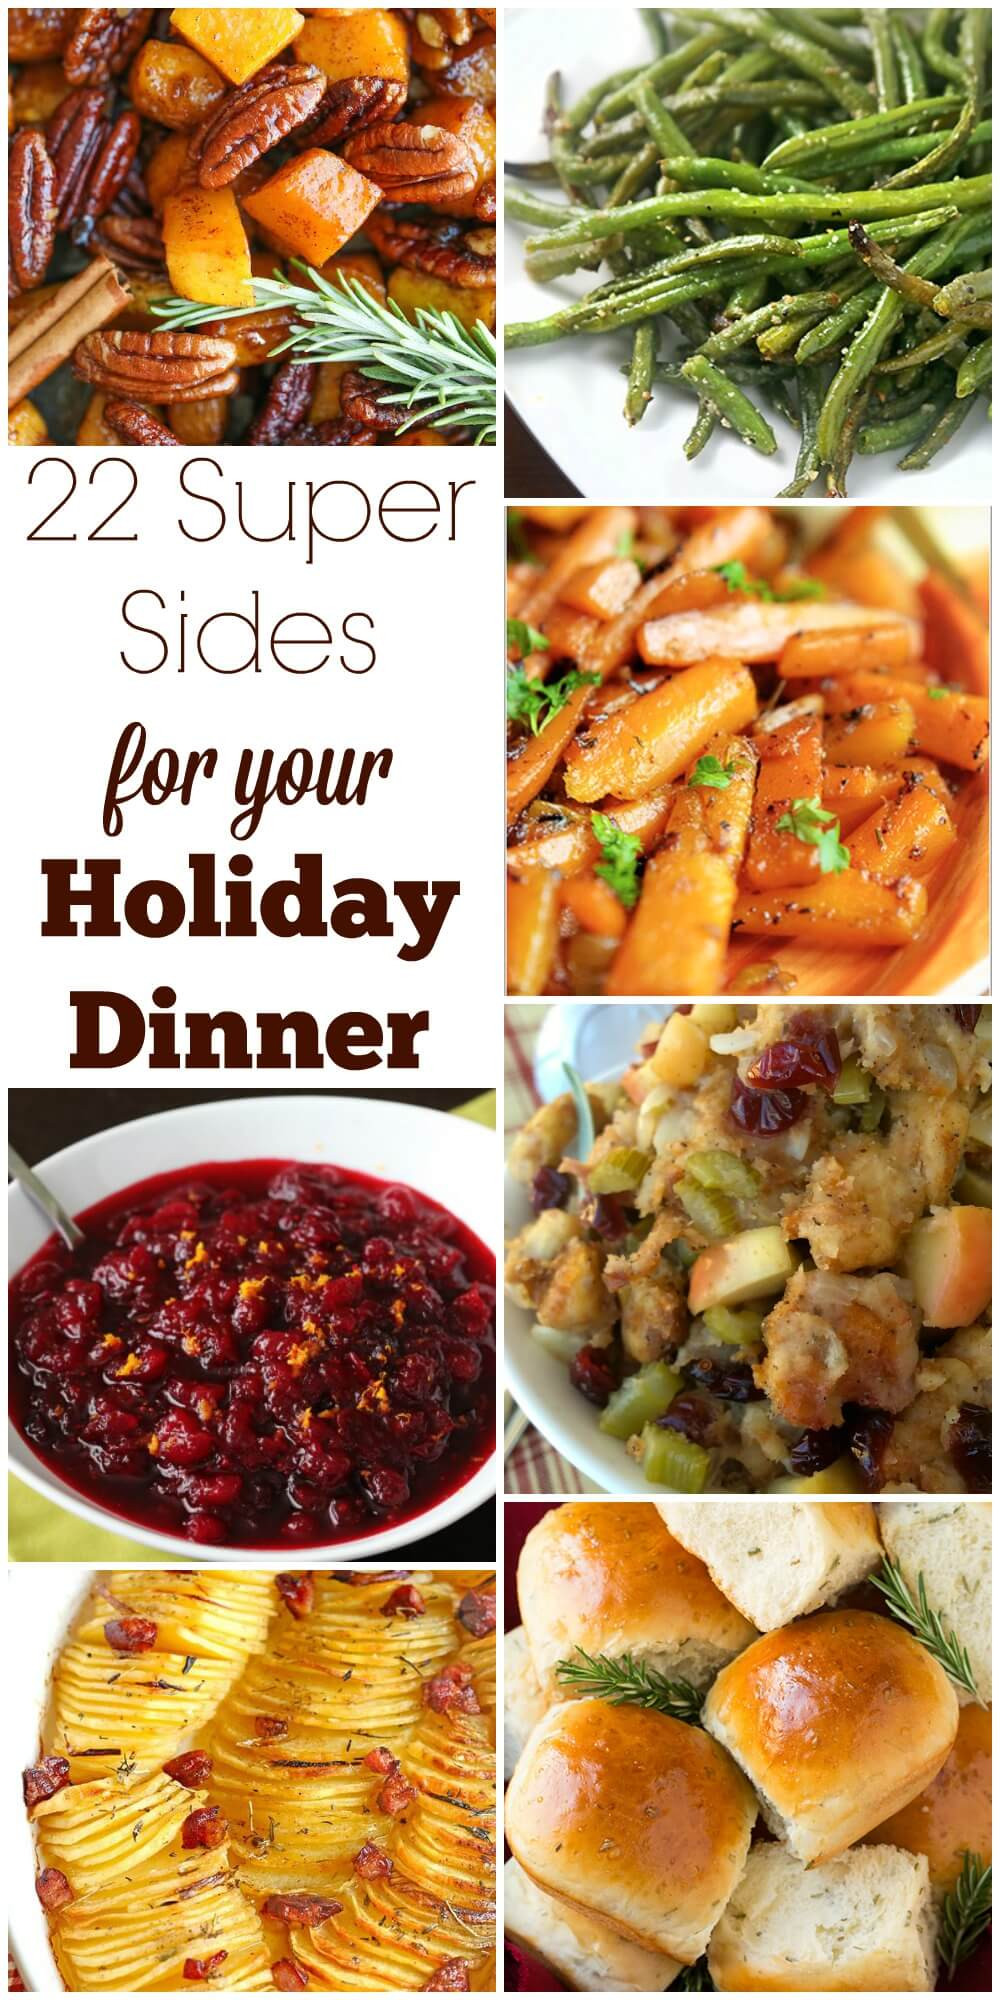 Best Side Dishes For Christmas Dinner
 22 Super Sides for Your Holiday Dinner